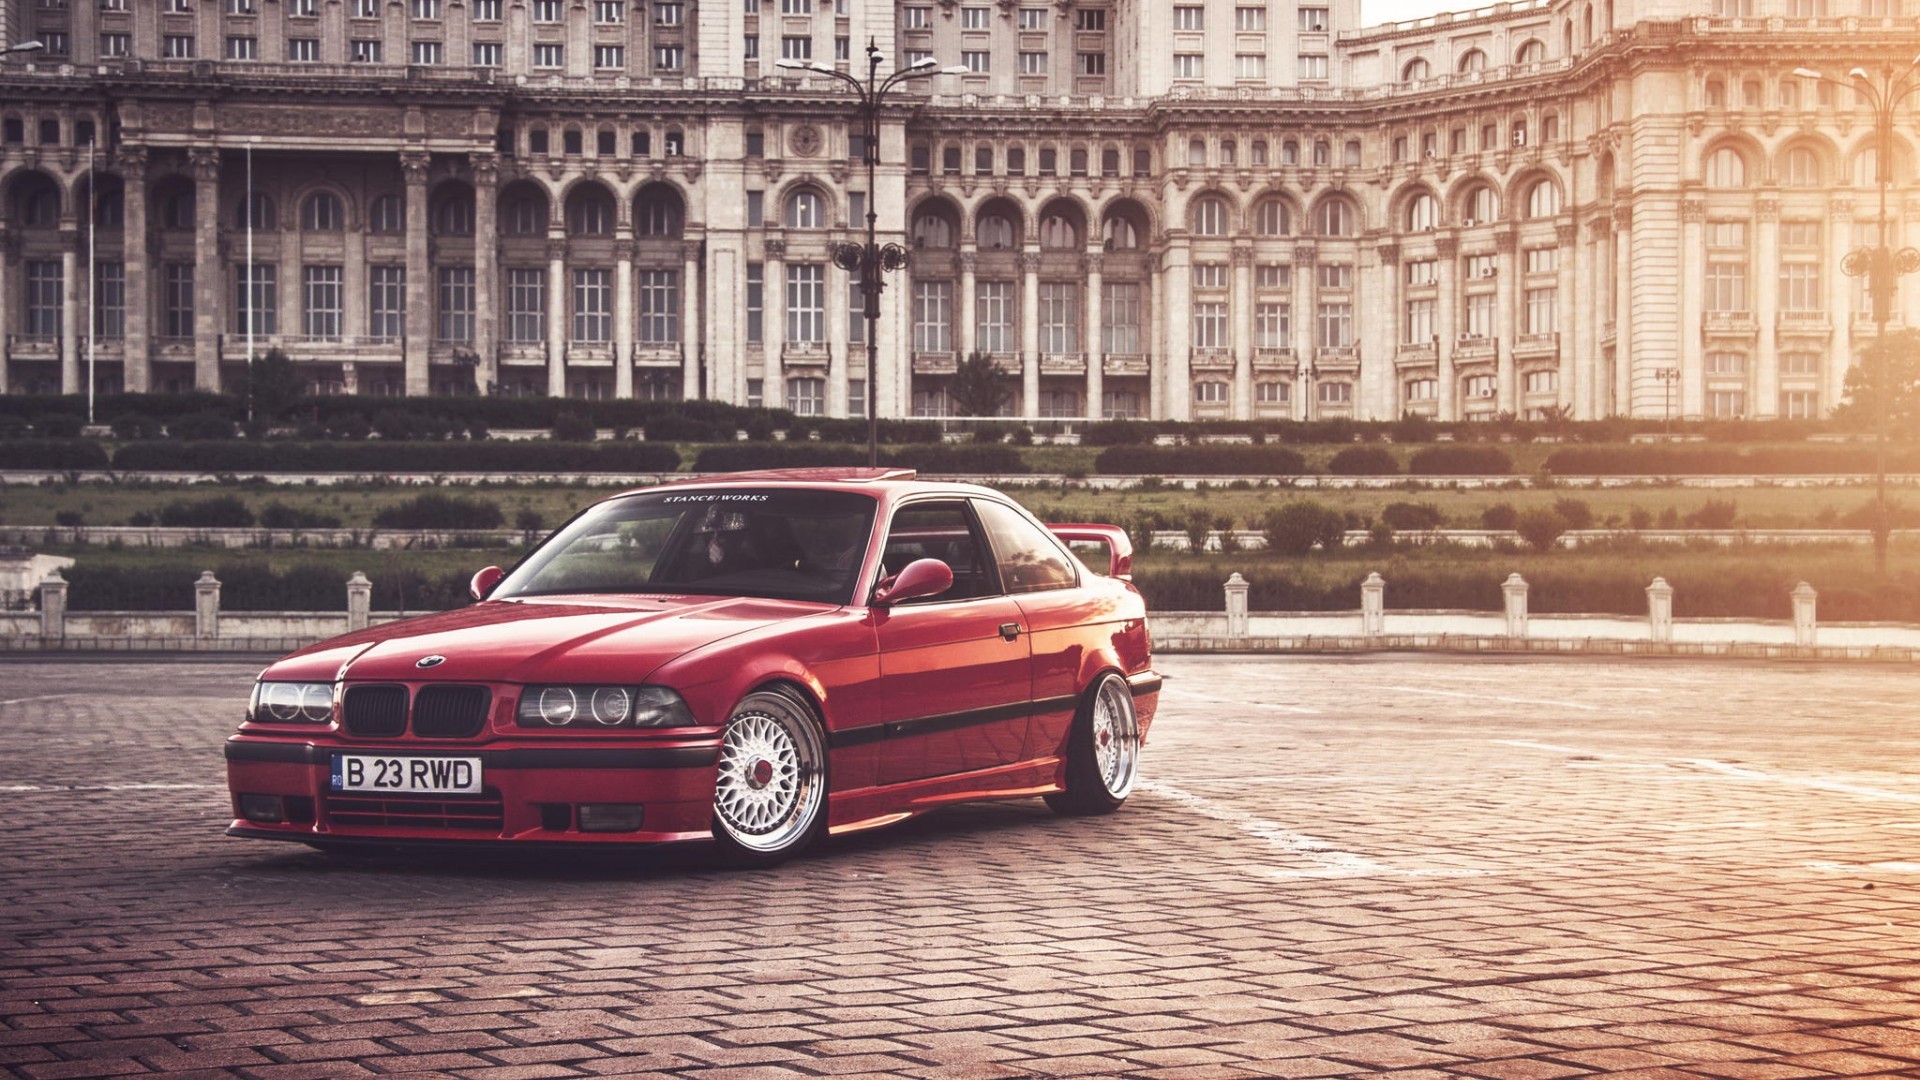 Bucharest Bmw E36 Stance Wallpapers Hd Desktop And Mobile Backgrounds